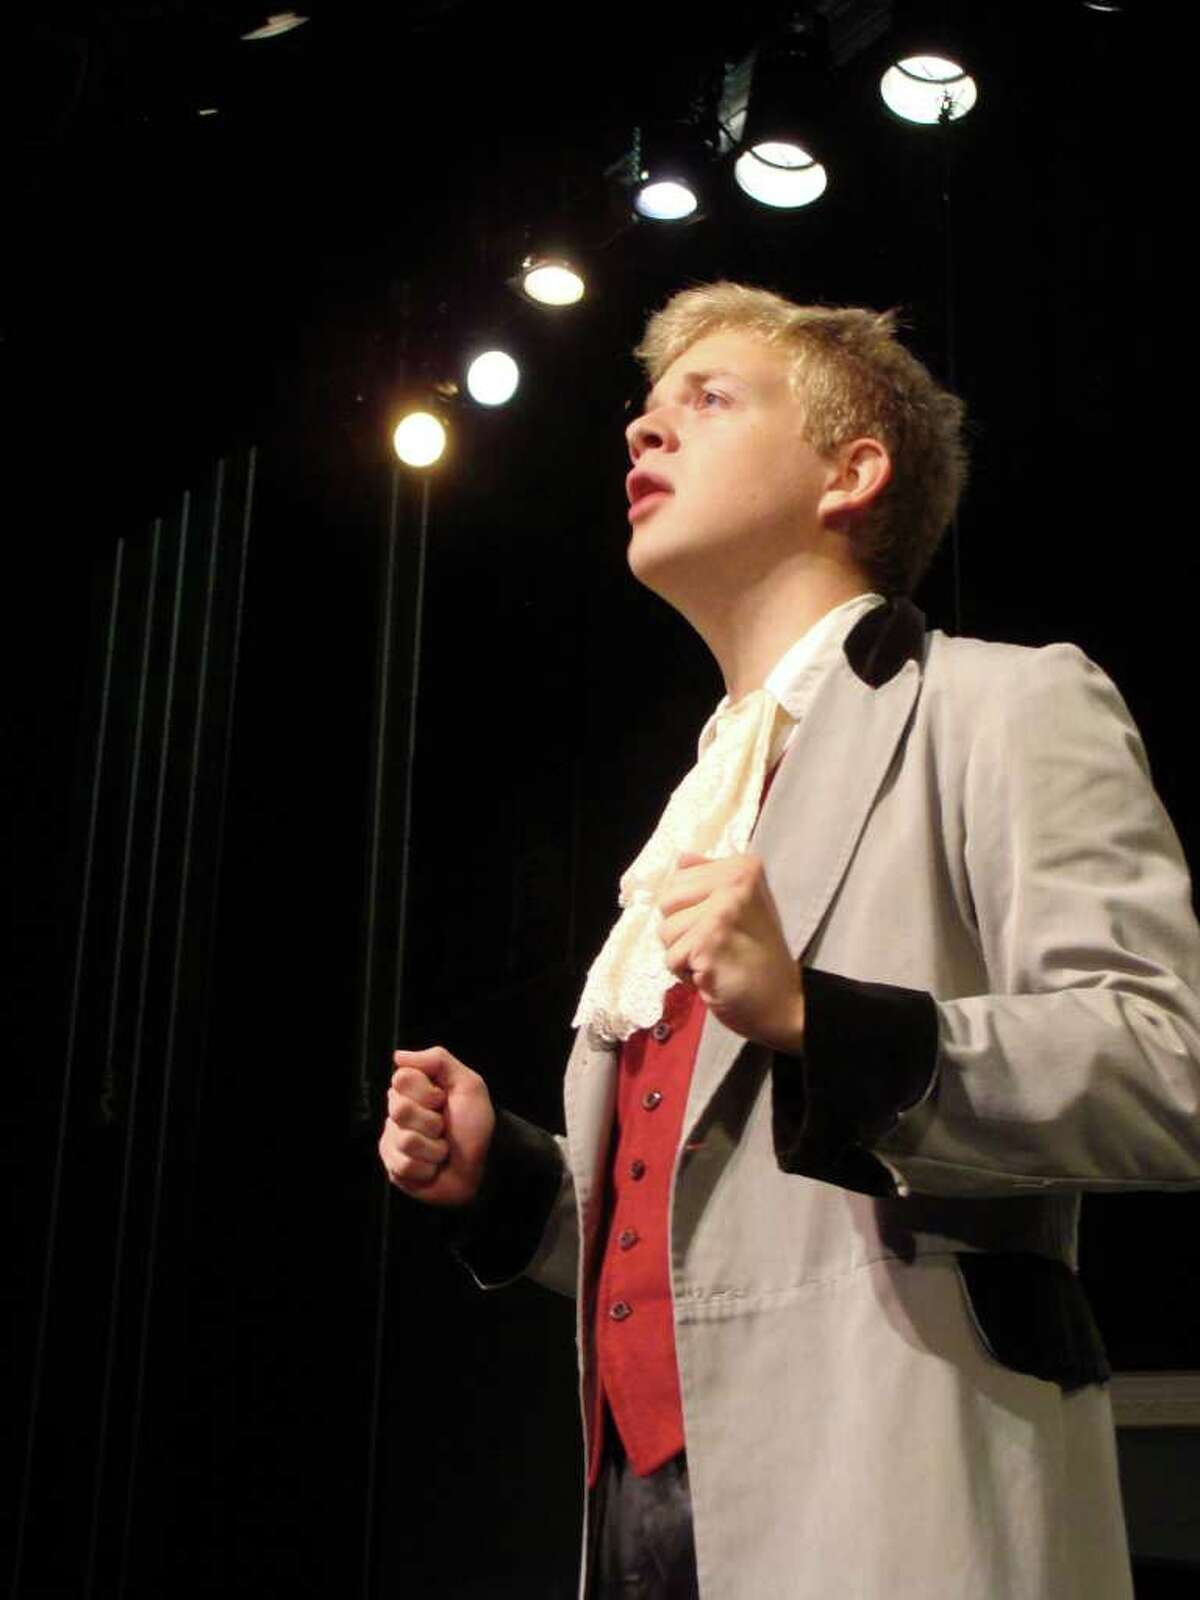 Sam Jones, 18, of Fairfield, portrays Javert in the Fairfield Teen Theatre's production of "Les Miserables" this weekend and next at Fairfield Warde High School.